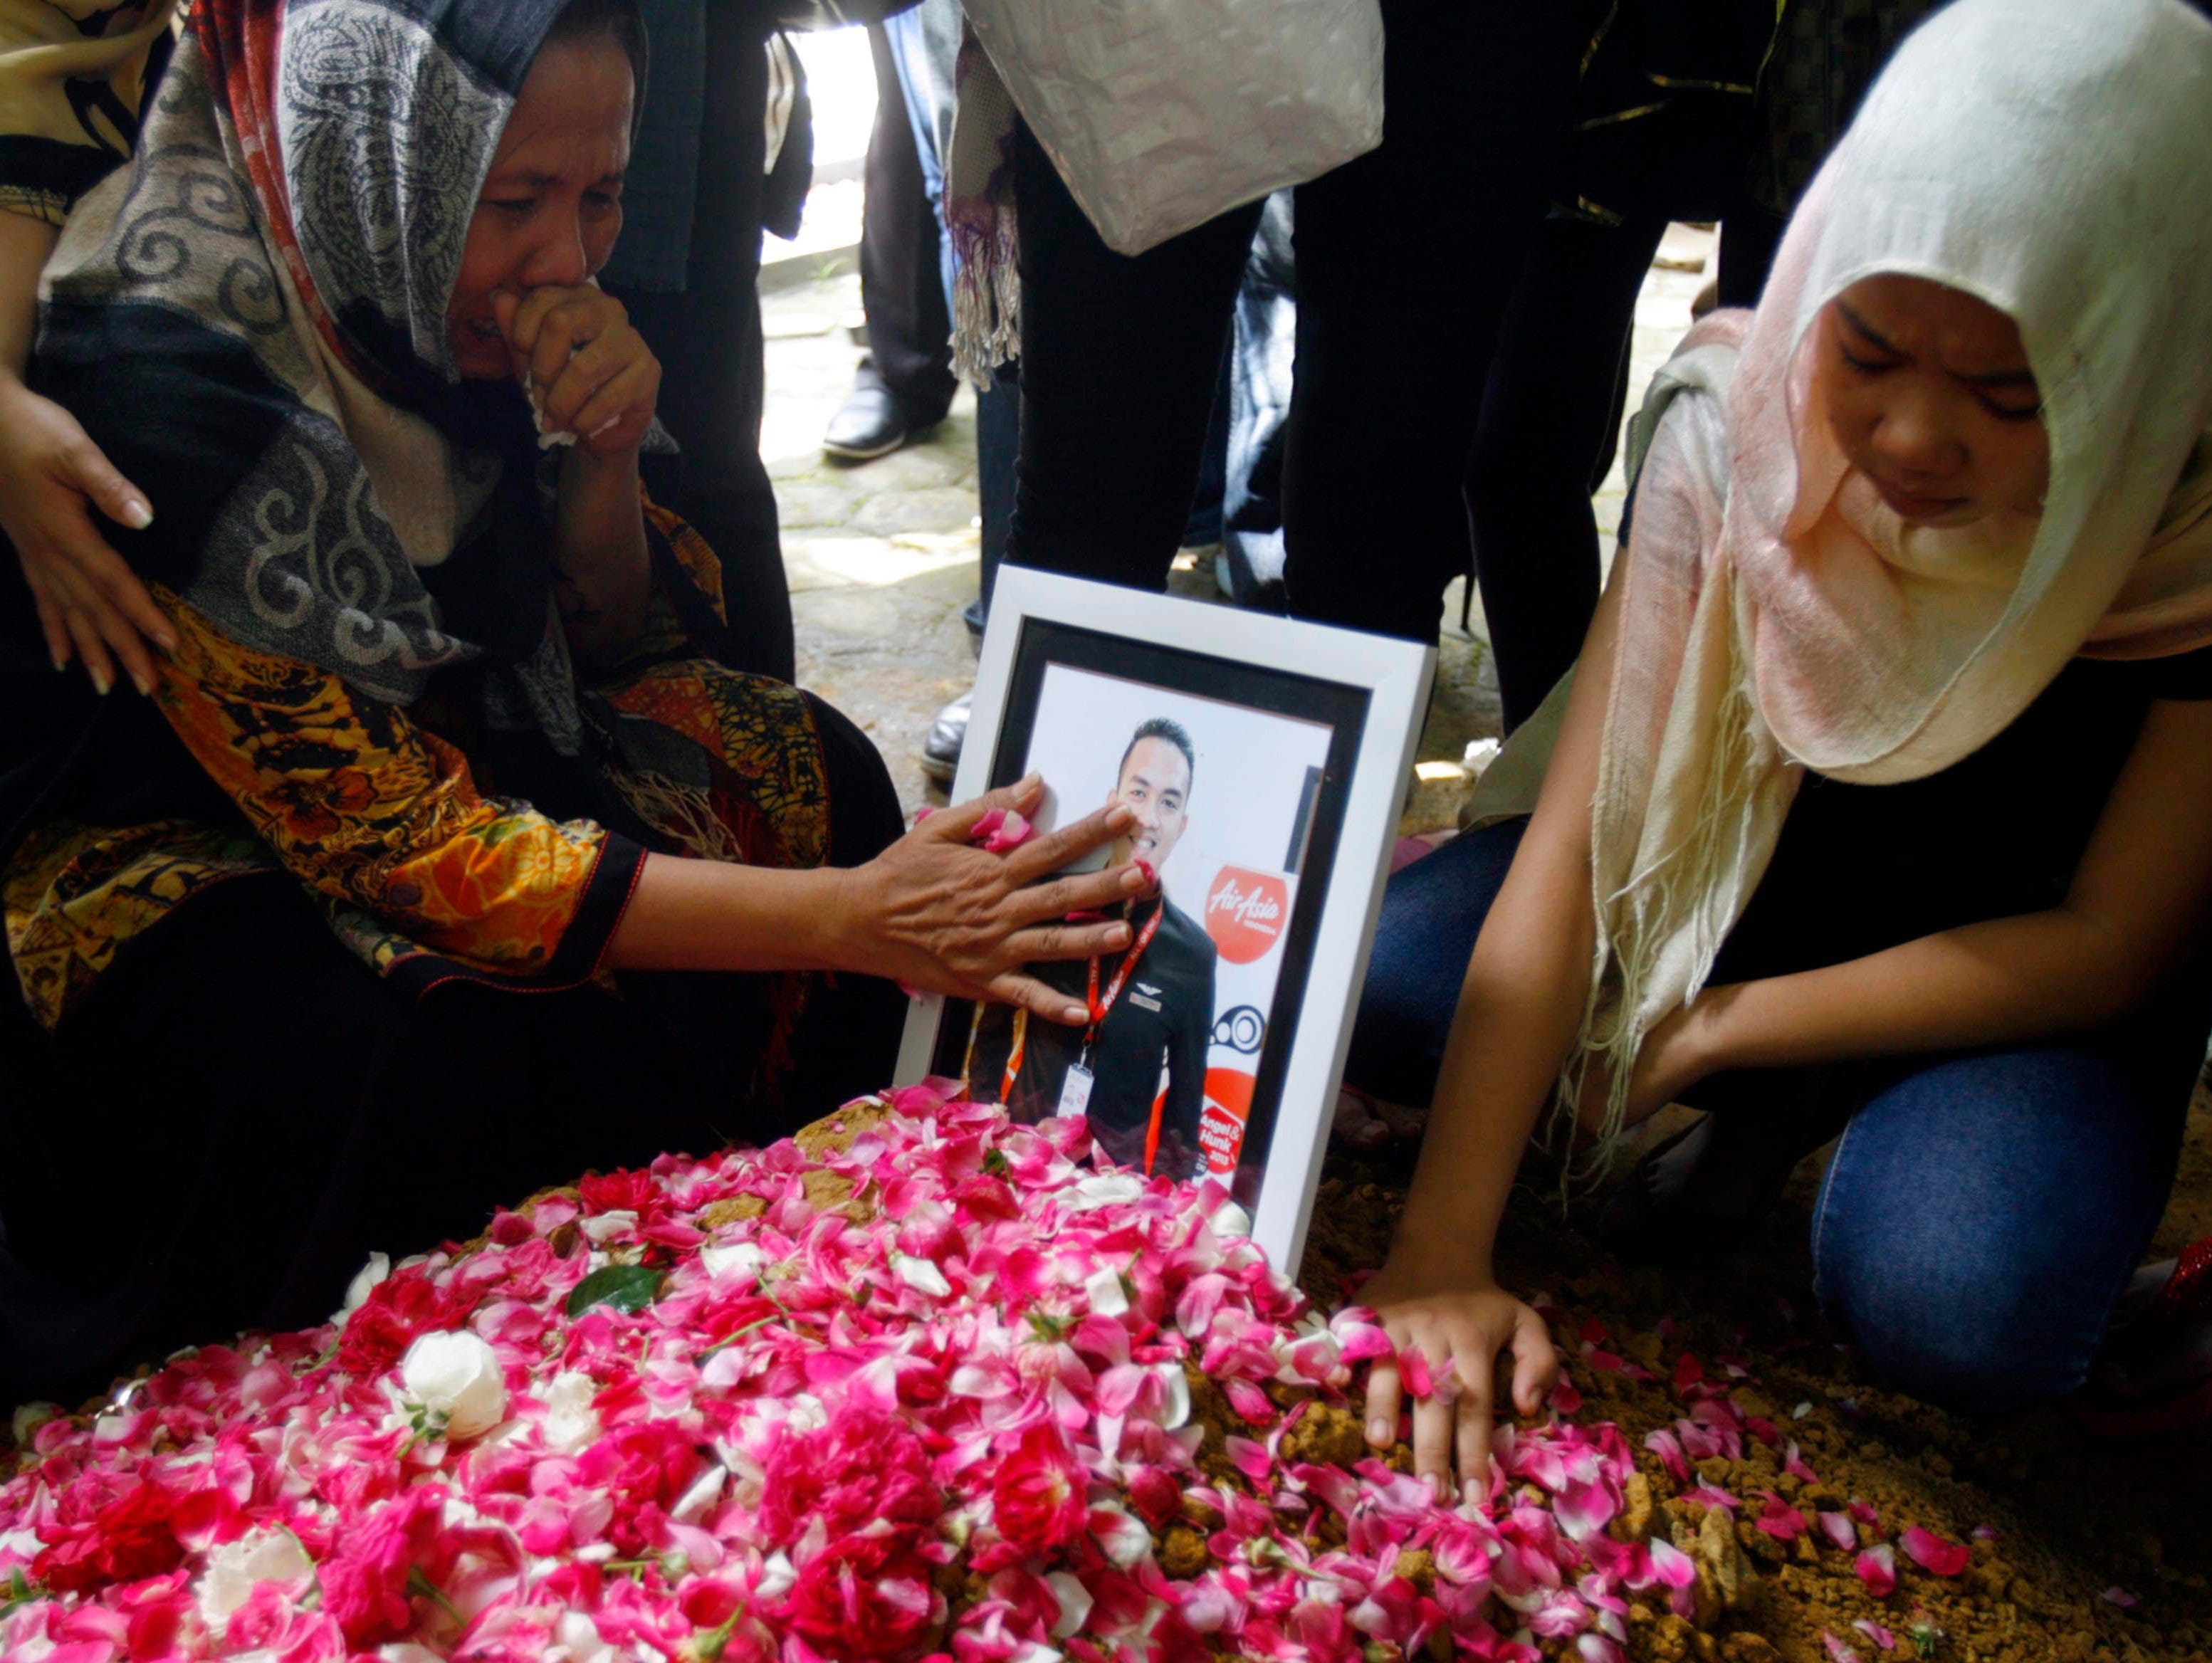 Relatives of Oscar Desano, one of the cabin crew of crashed AirAsia flight QZ8501, mourn during his burial at a cemetery in Klaten, Central Java province, Indonesia.